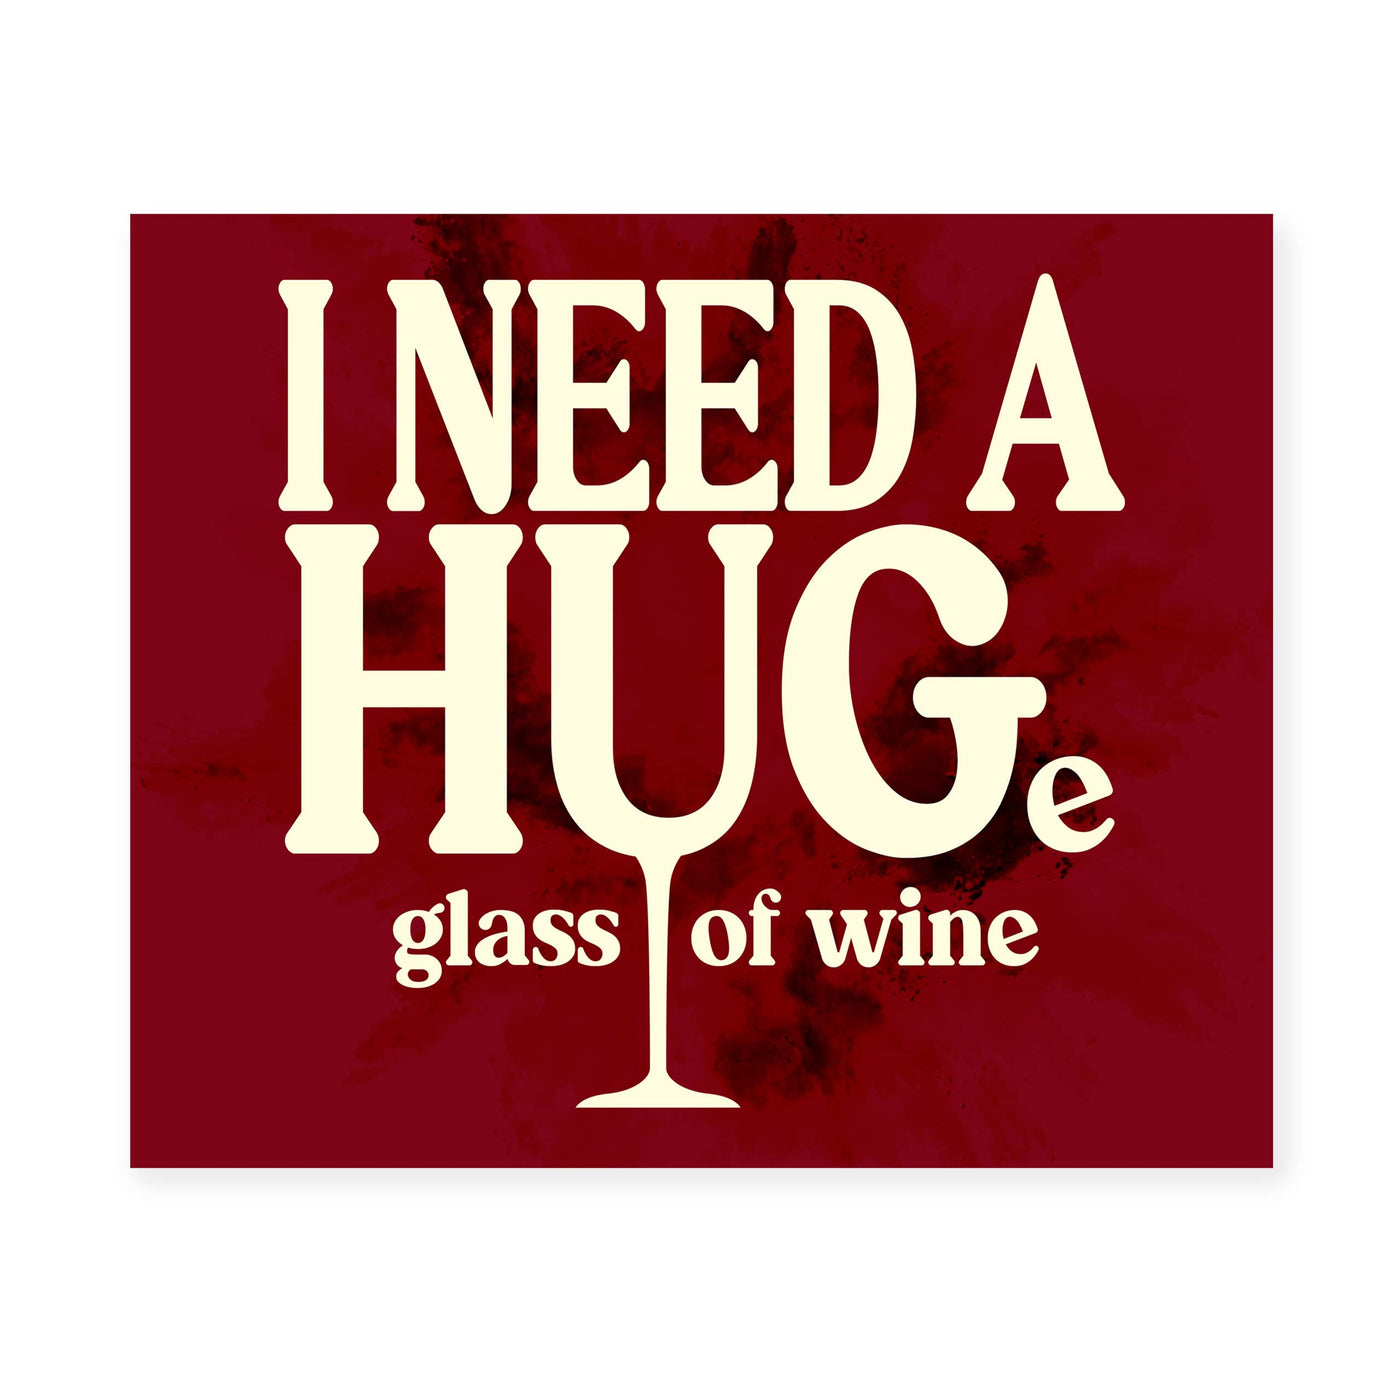 I Need a HUGe Glass of Wine Funny Wall Decor Sign -10 x 8" Modern Kitchen & Dining Wall Art Print -Ready to Frame. Humorous Decoration for Home-Office-Bar-Cave Decor. Fun Gift for All Wine Lovers!